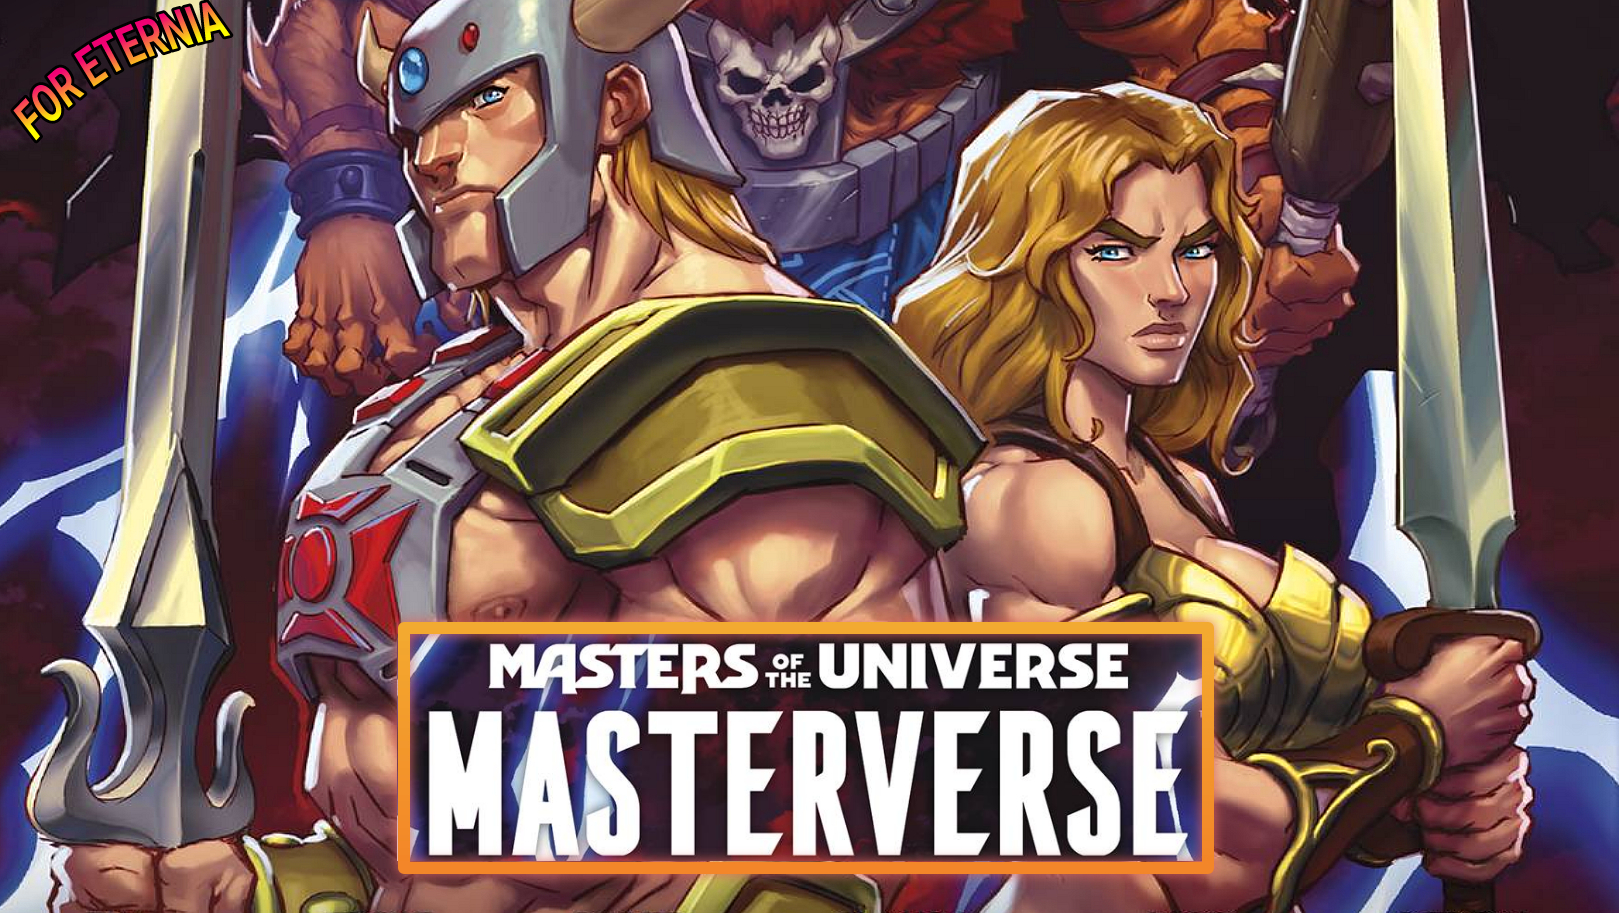 New Covers and Stories Revealed for MASTERVERSE Comics